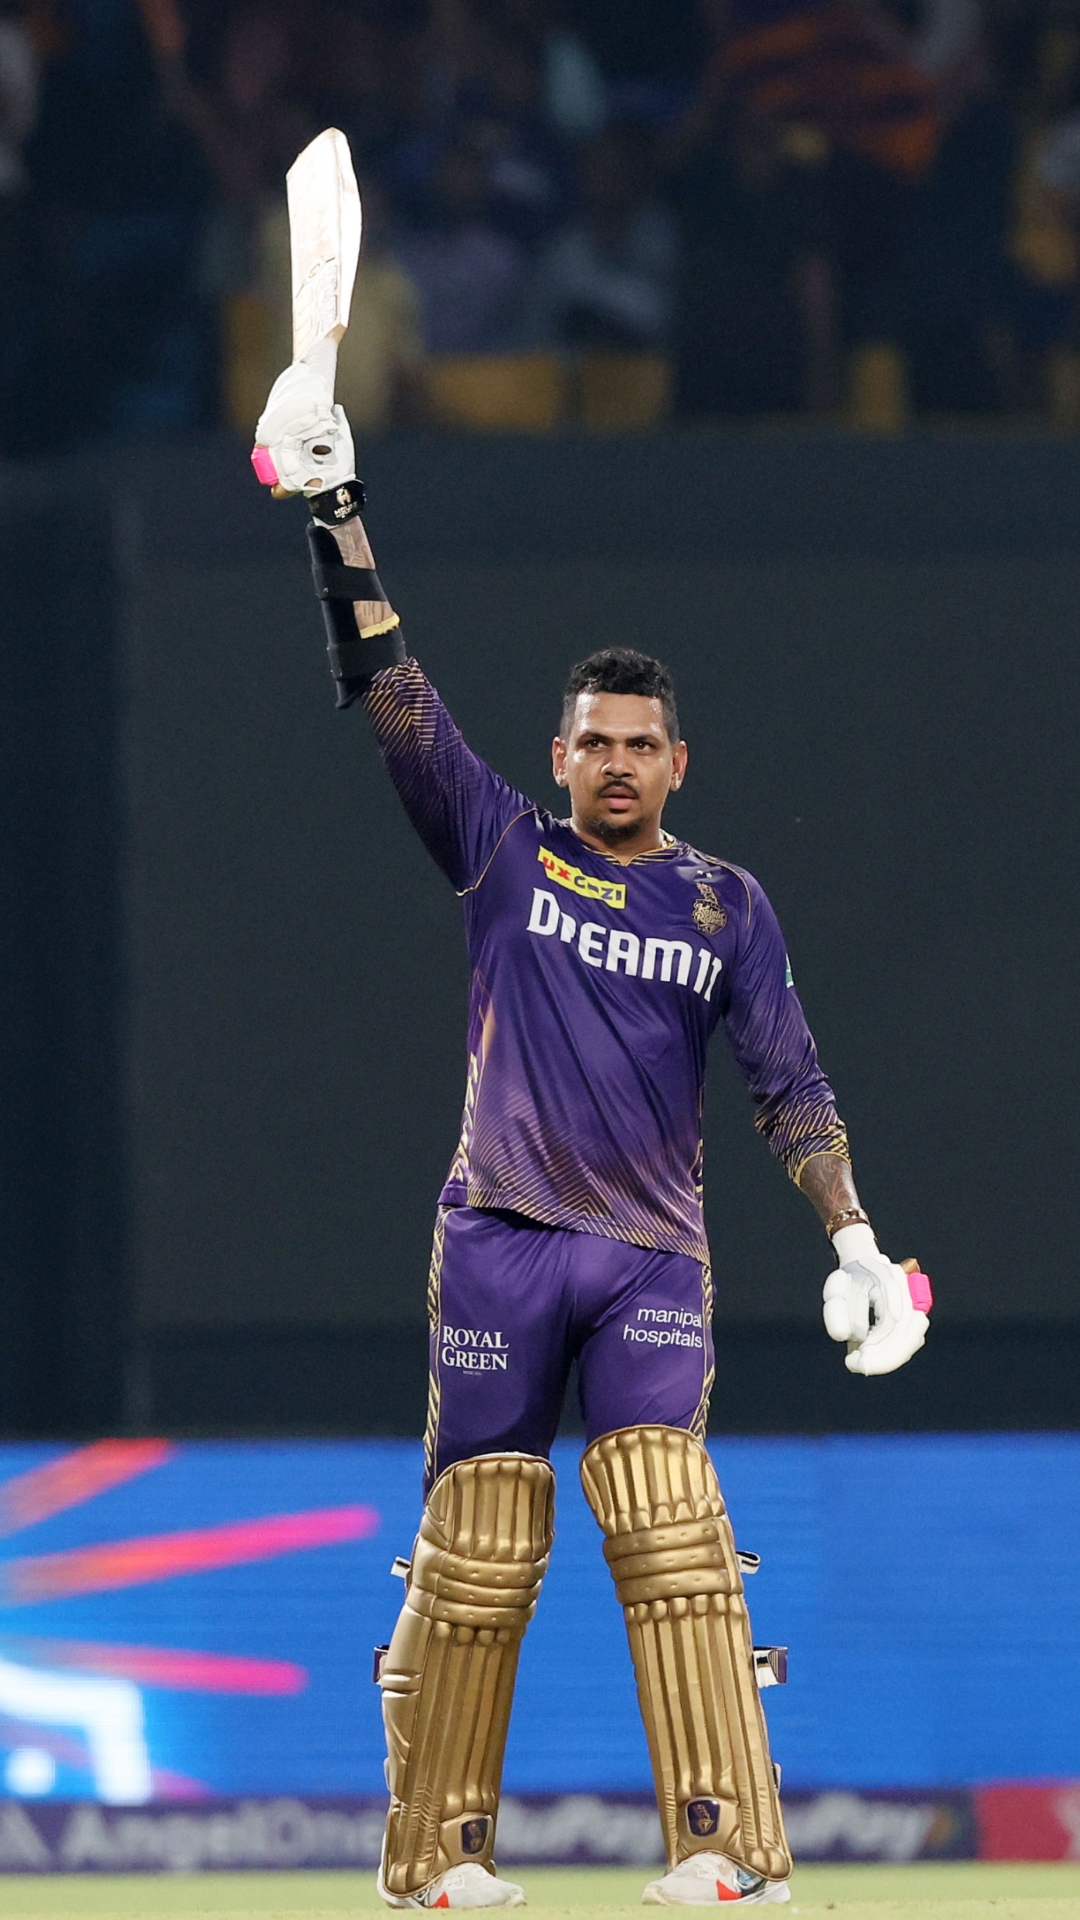 Sunil Narine creates two never-before-seen records in IPL history, achieves what no player has ever done
